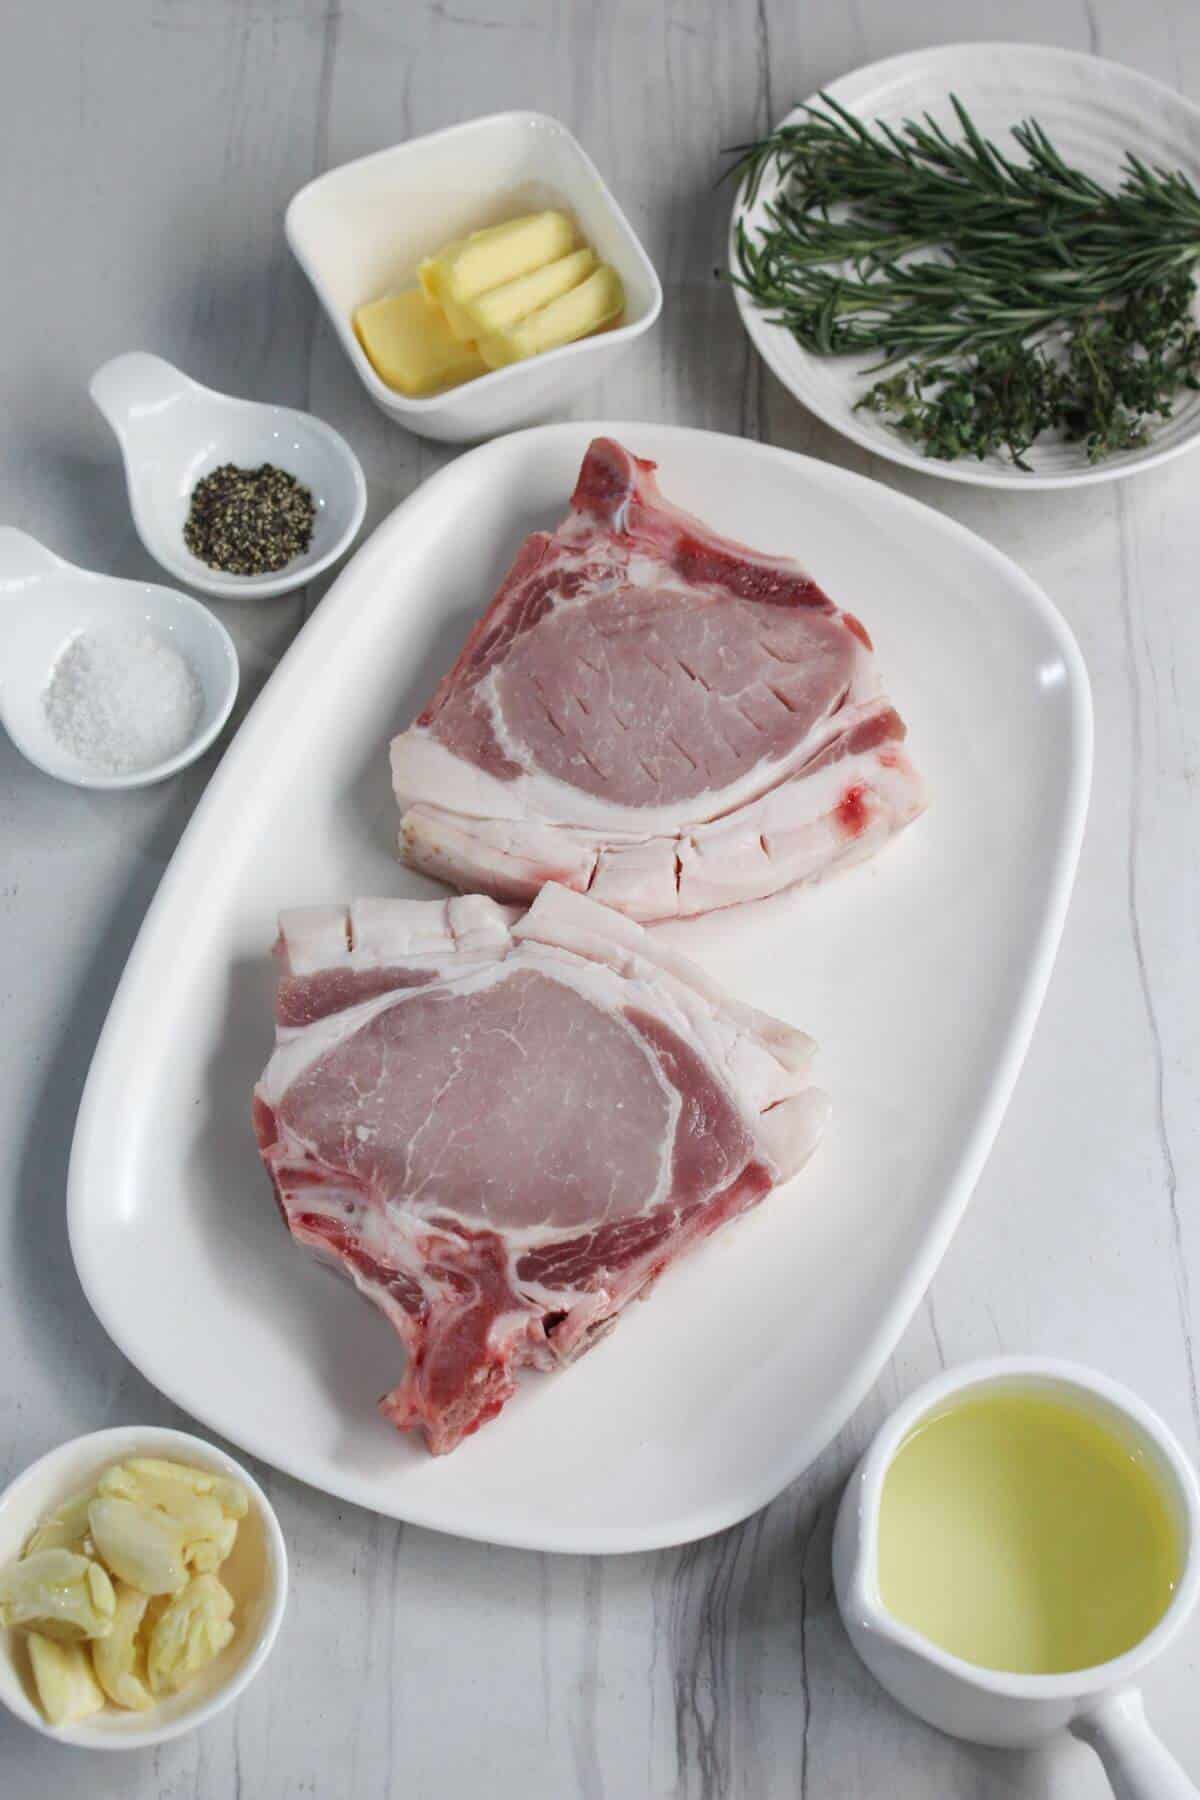 Pork chops on a white plate with herbs and spices.